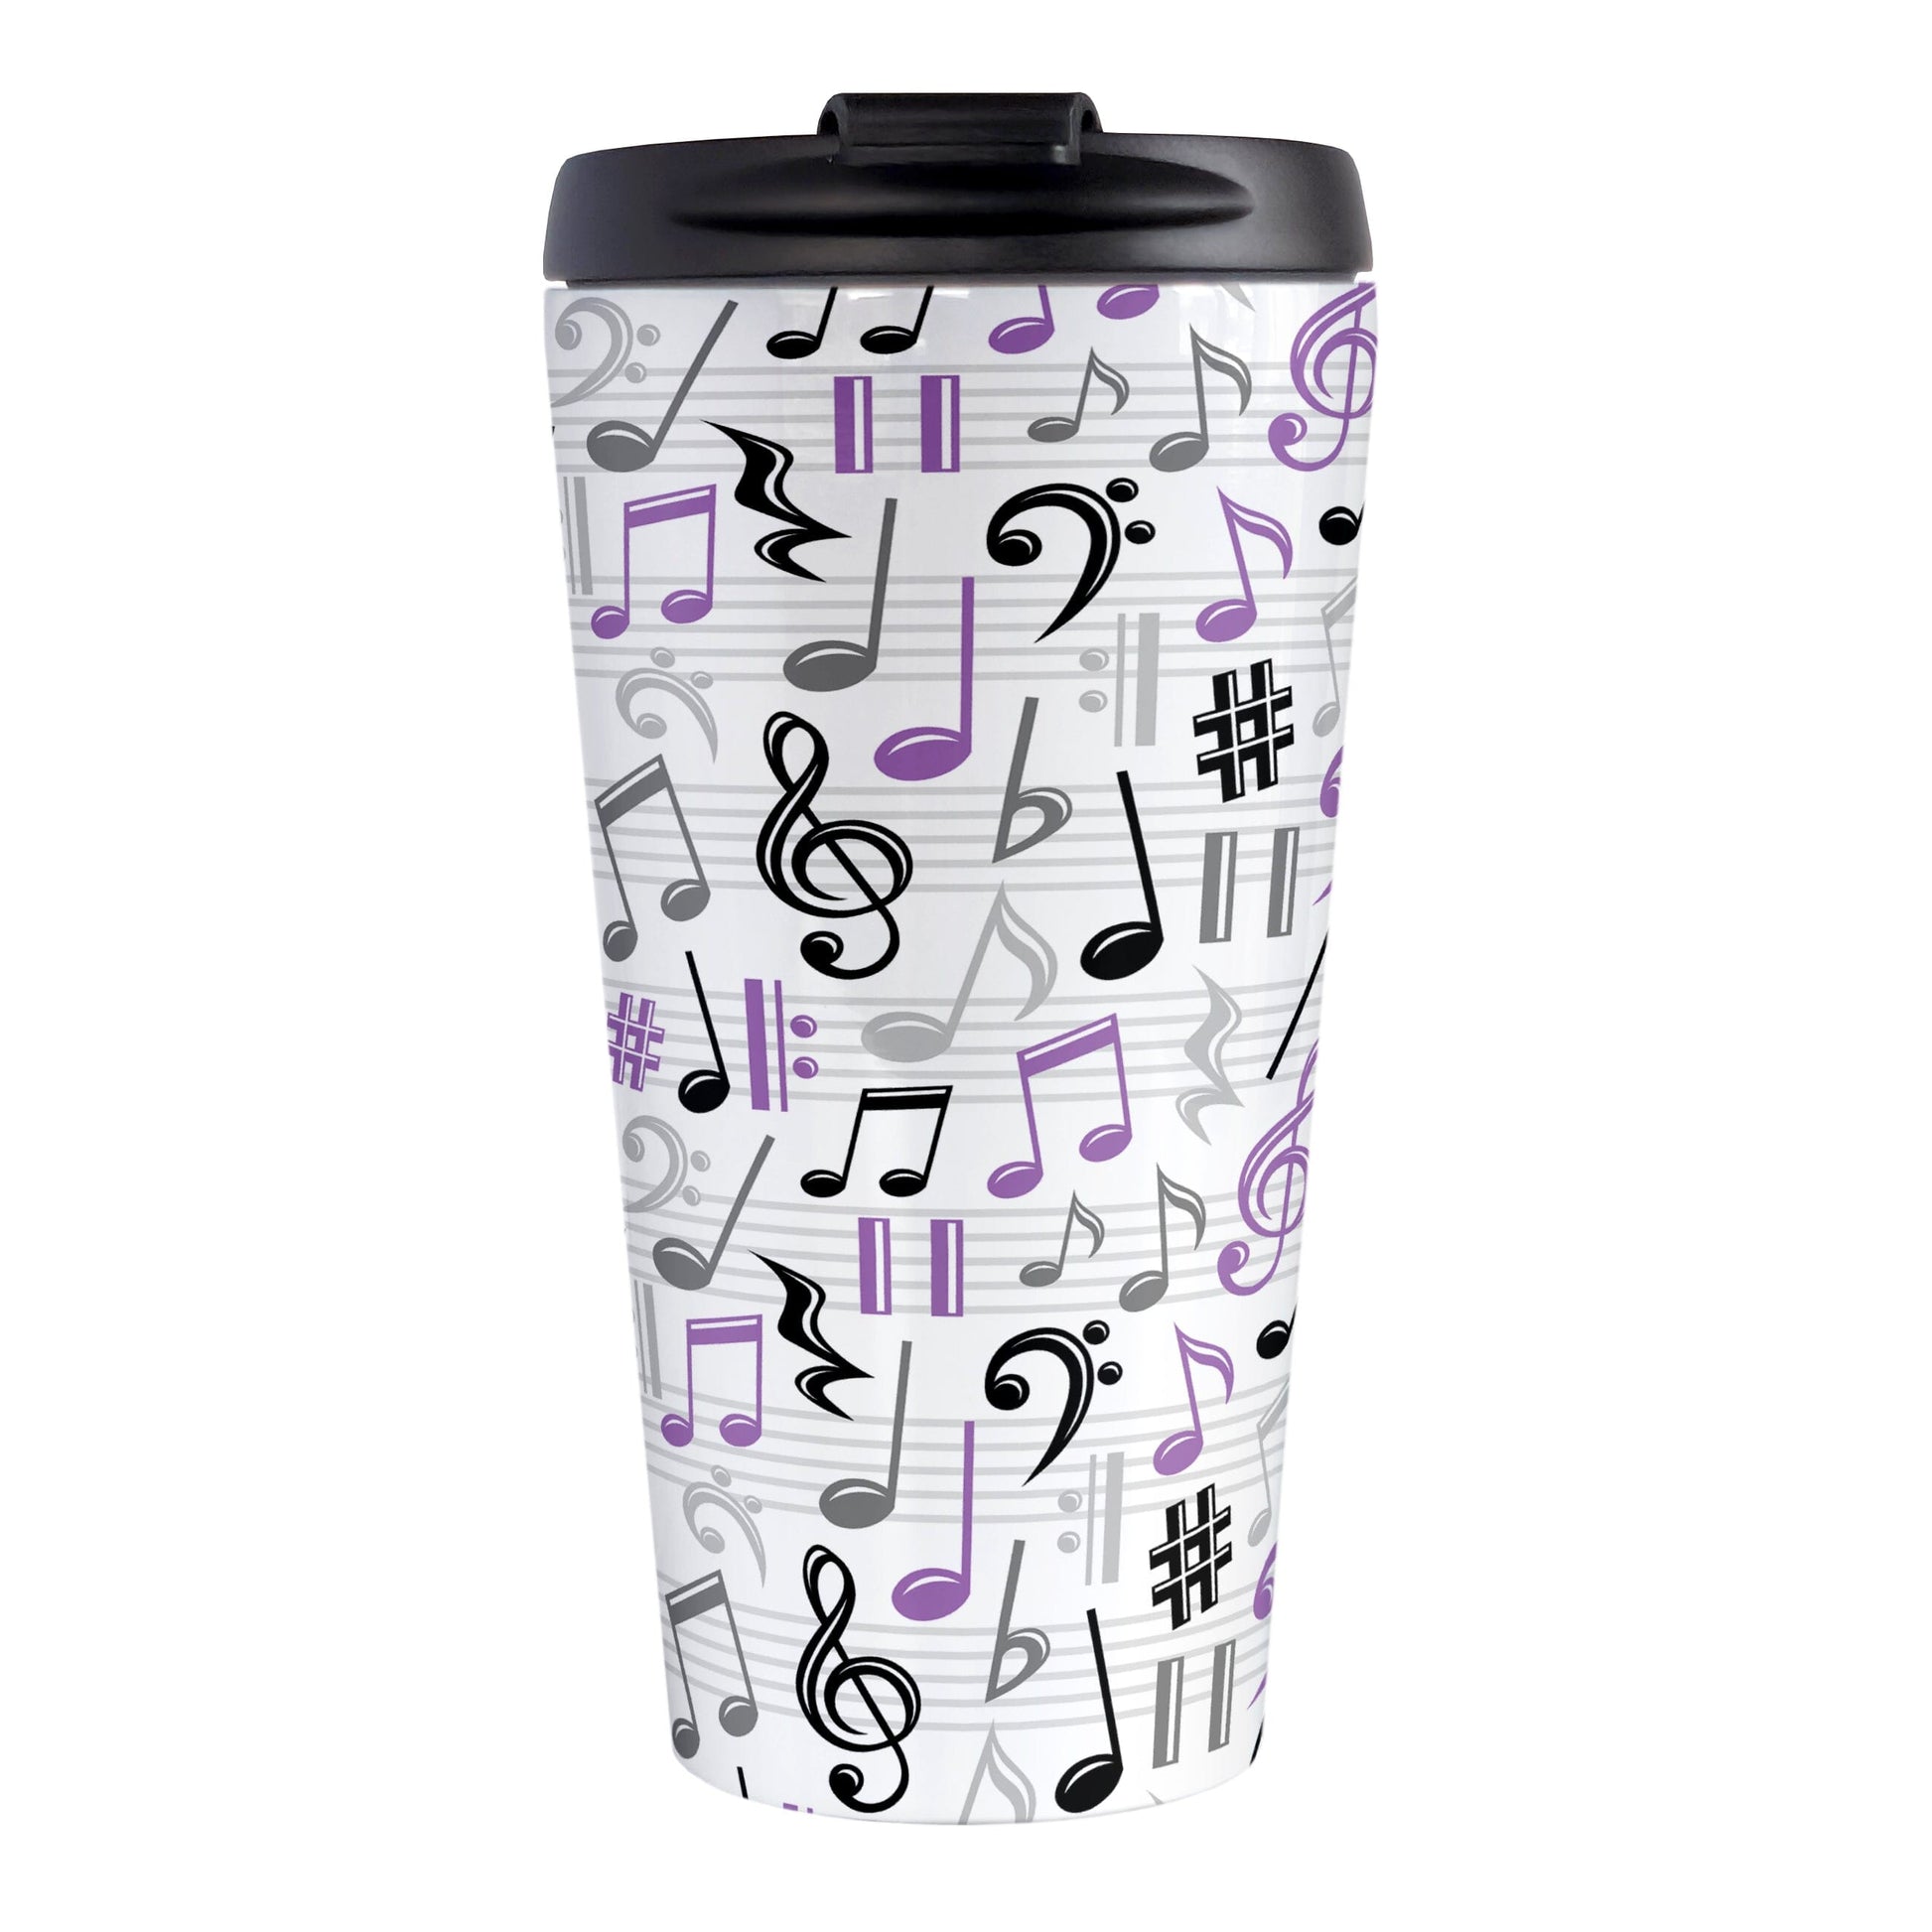 Purple Music Notes Pattern Travel Mug (15oz) at Amy's Coffee Mugs. A stainless steel travel mug designed with music notes and symbols in purple, black, and gray in a pattern that wraps around the travel mug.